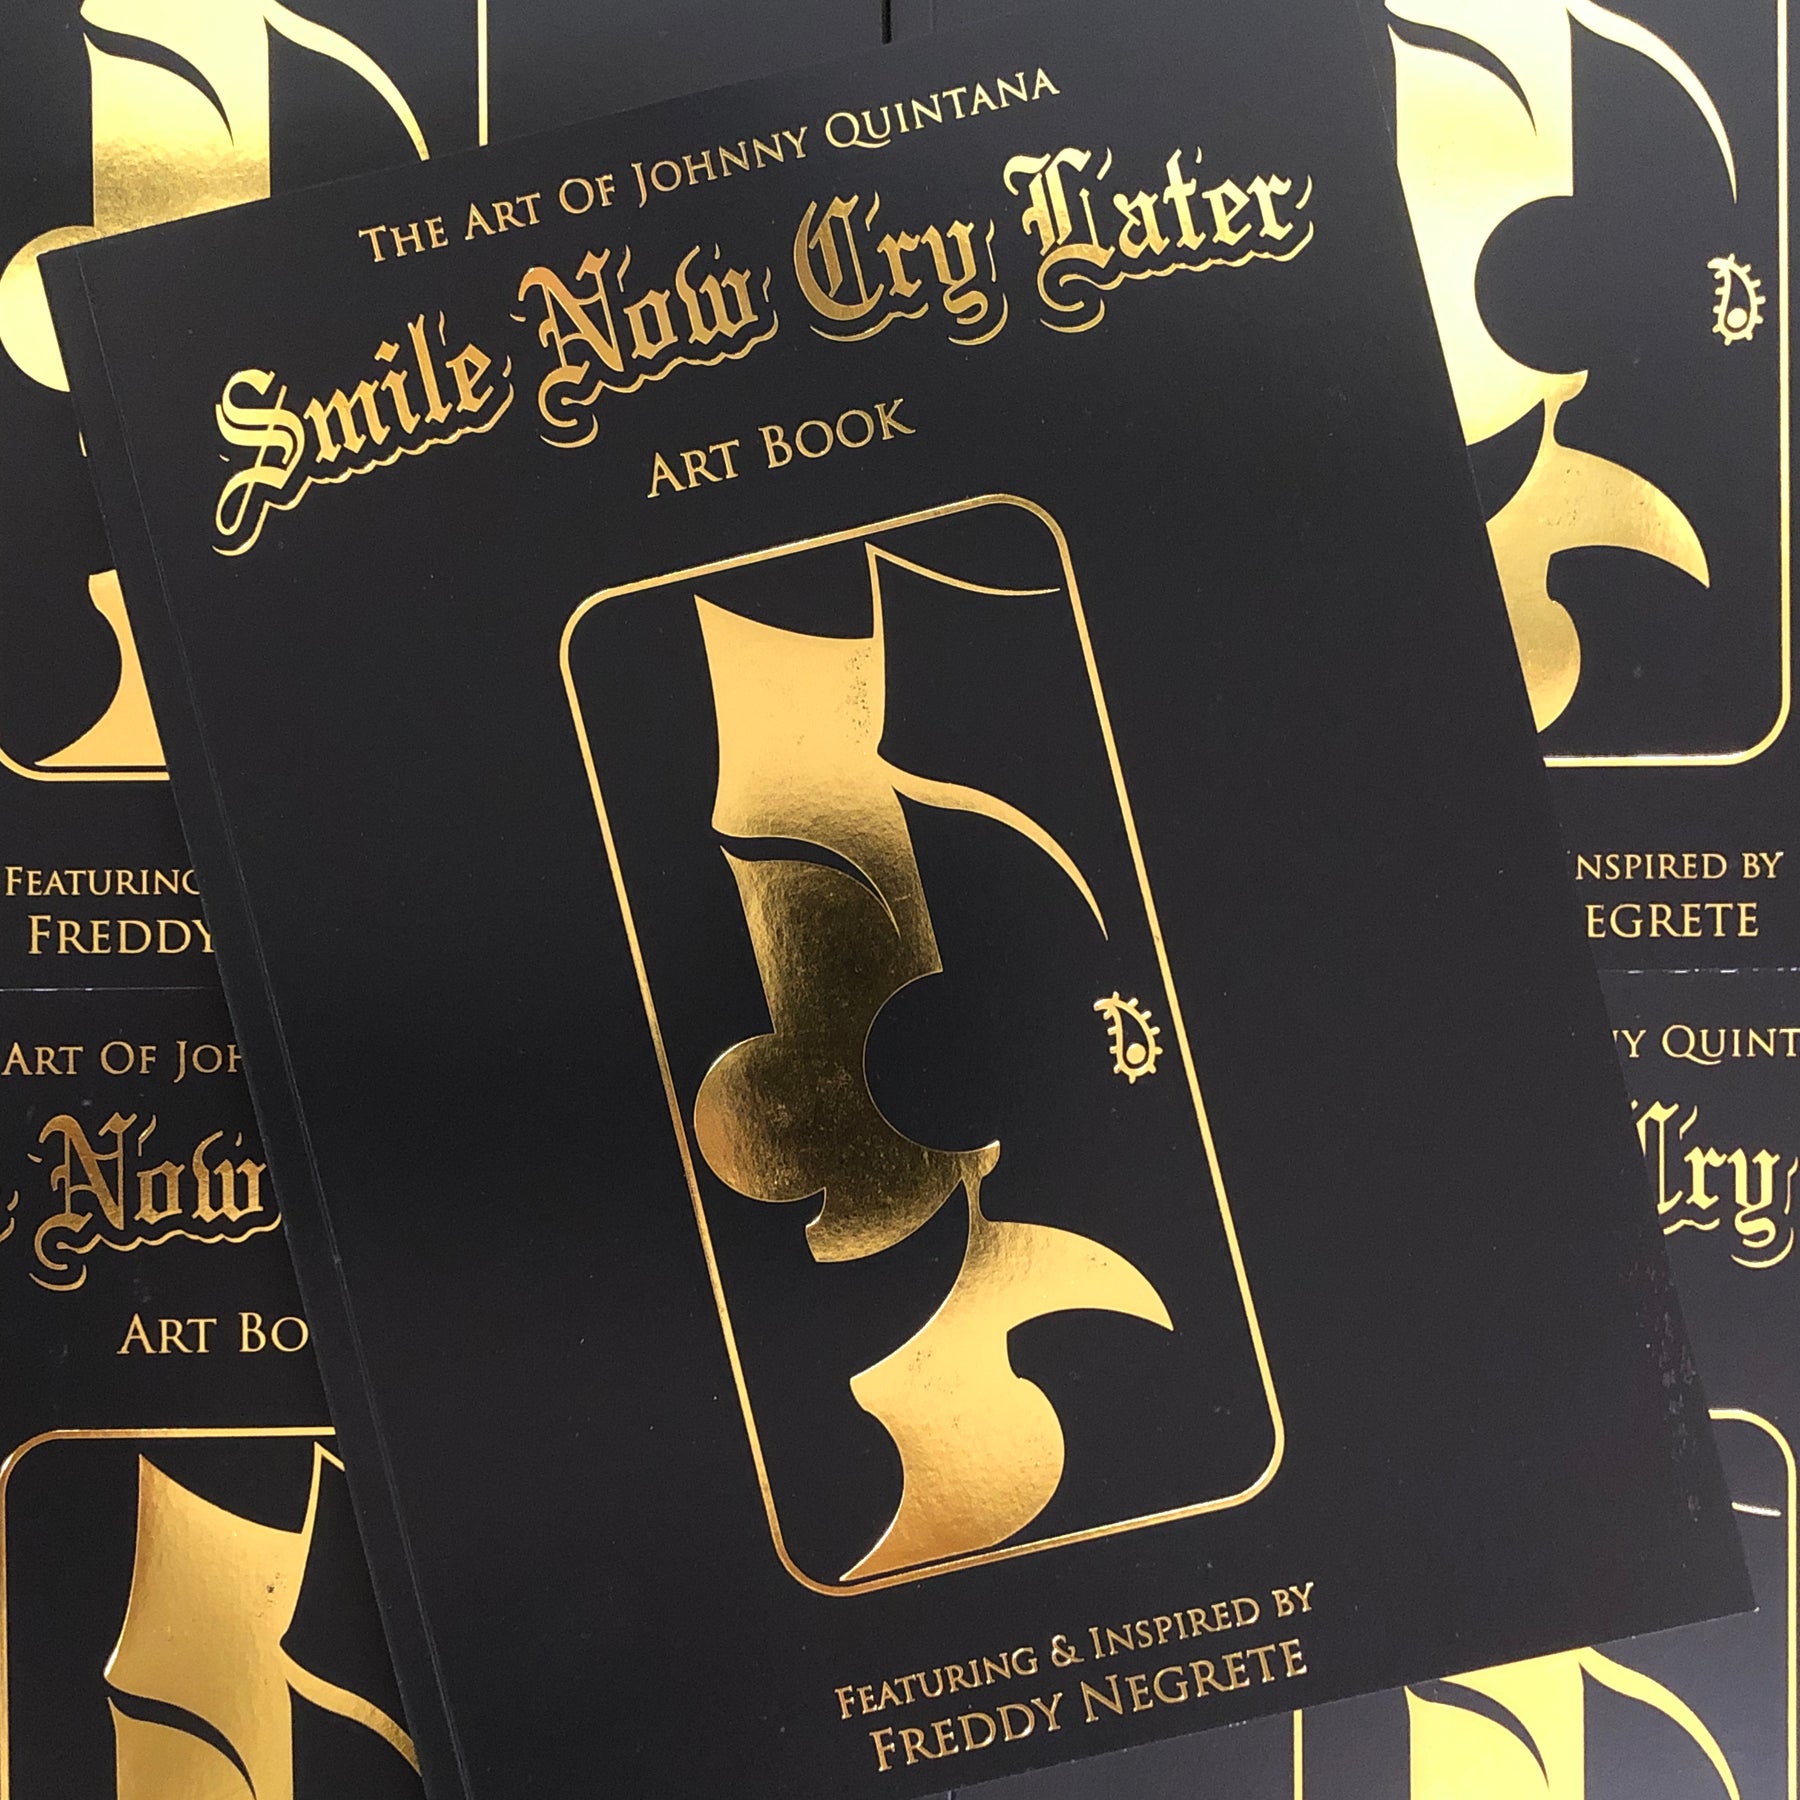 Smile Now Cry Later Book